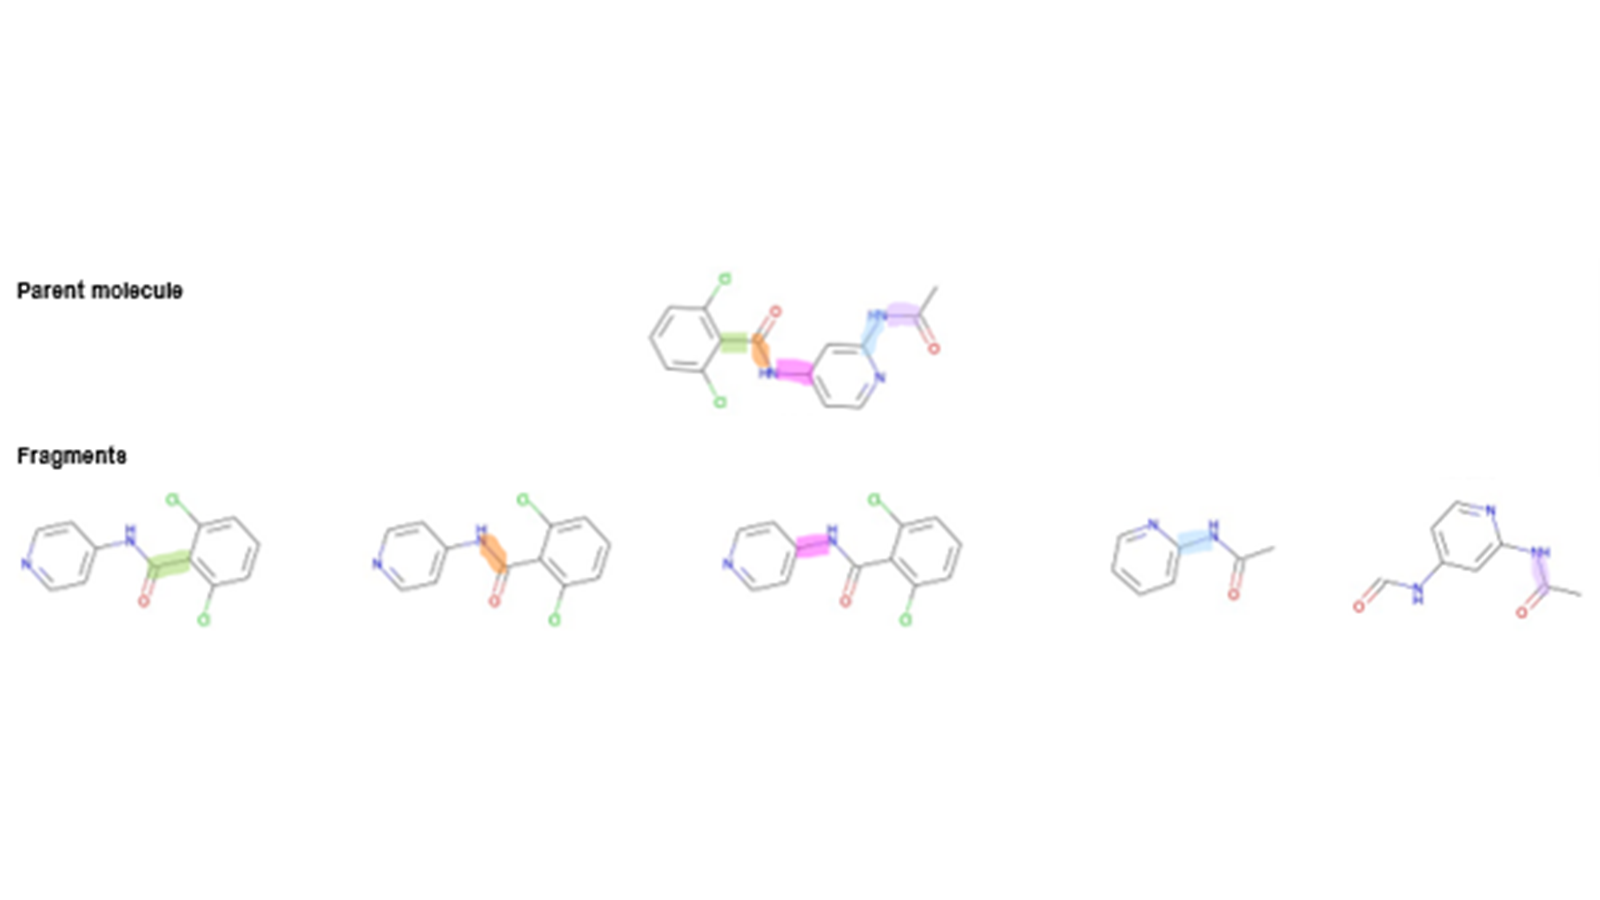 Example TYK2 inhibitor parent molecule and its fragments as generated in our workflow